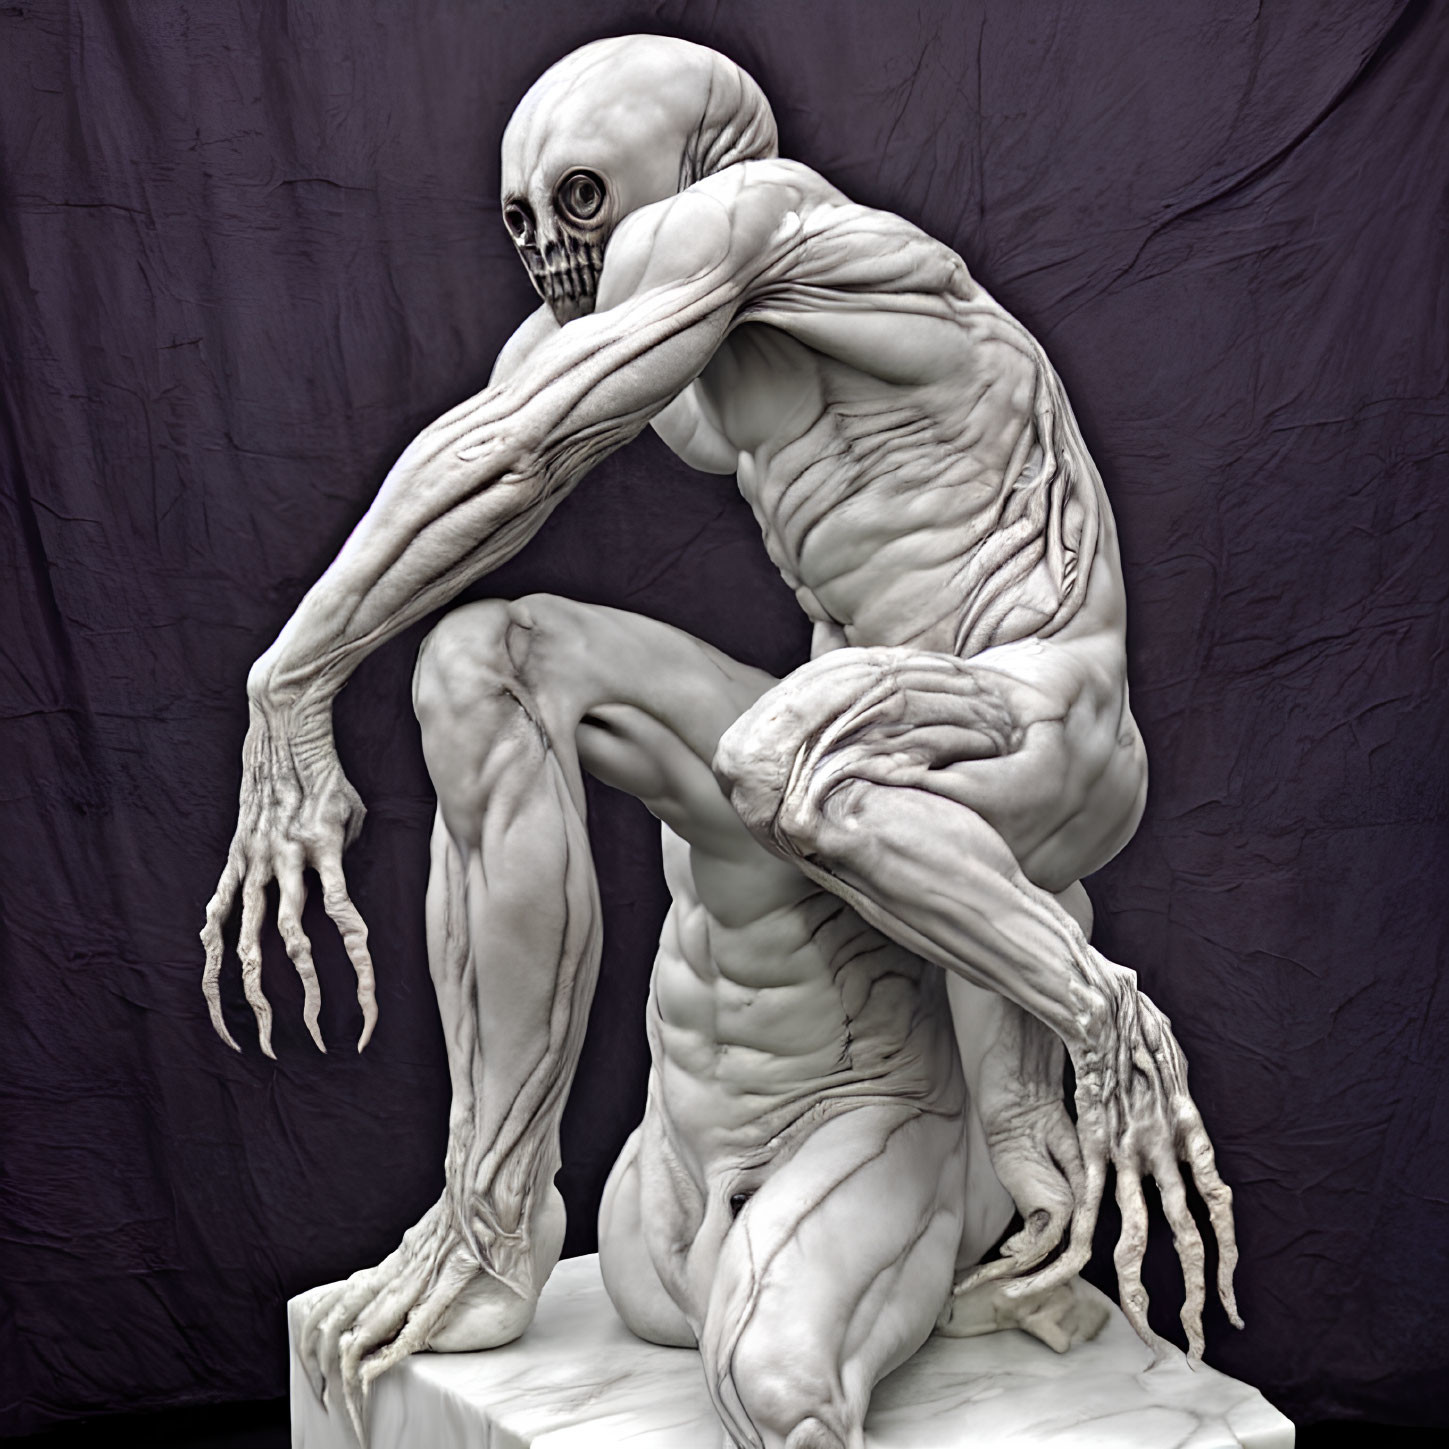 Elongated skull humanoid sculpture in crouched pose on purple background